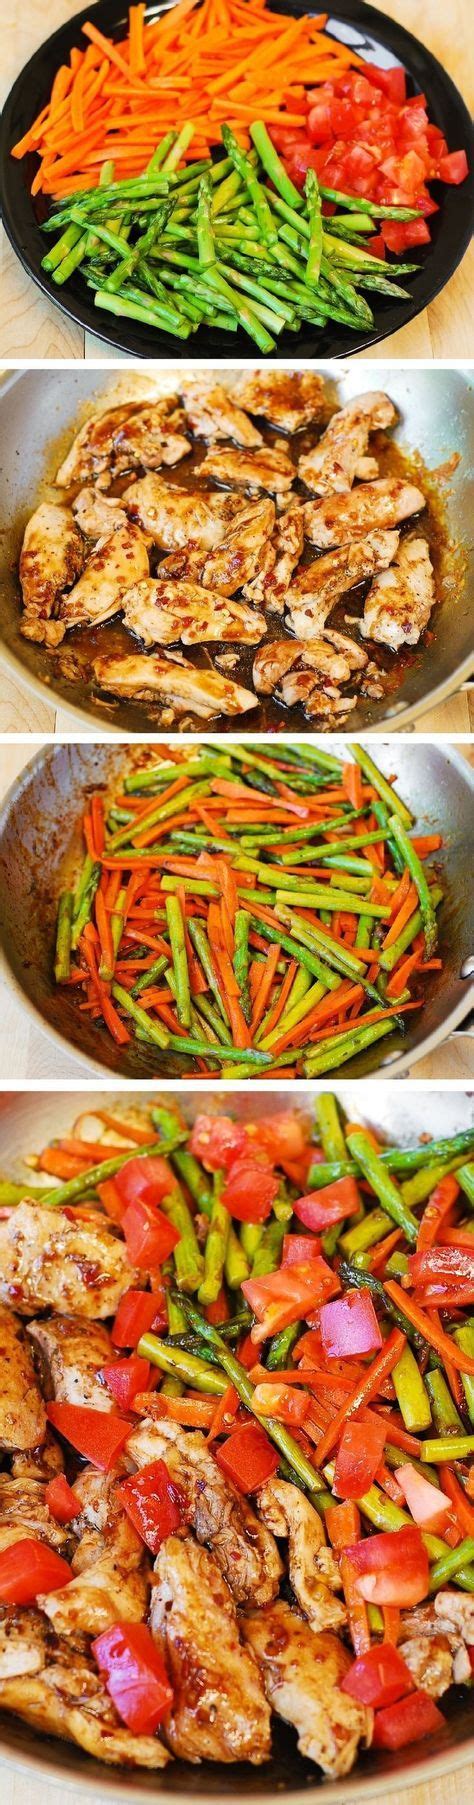 You don't have to skip on flavour with these easy low cholesterol recipes for meals and smart snacks. 30-Minute Meals for Quick, Healthy Dinner Ideas | Low calorie recipes, Healthy cooking, Healthy